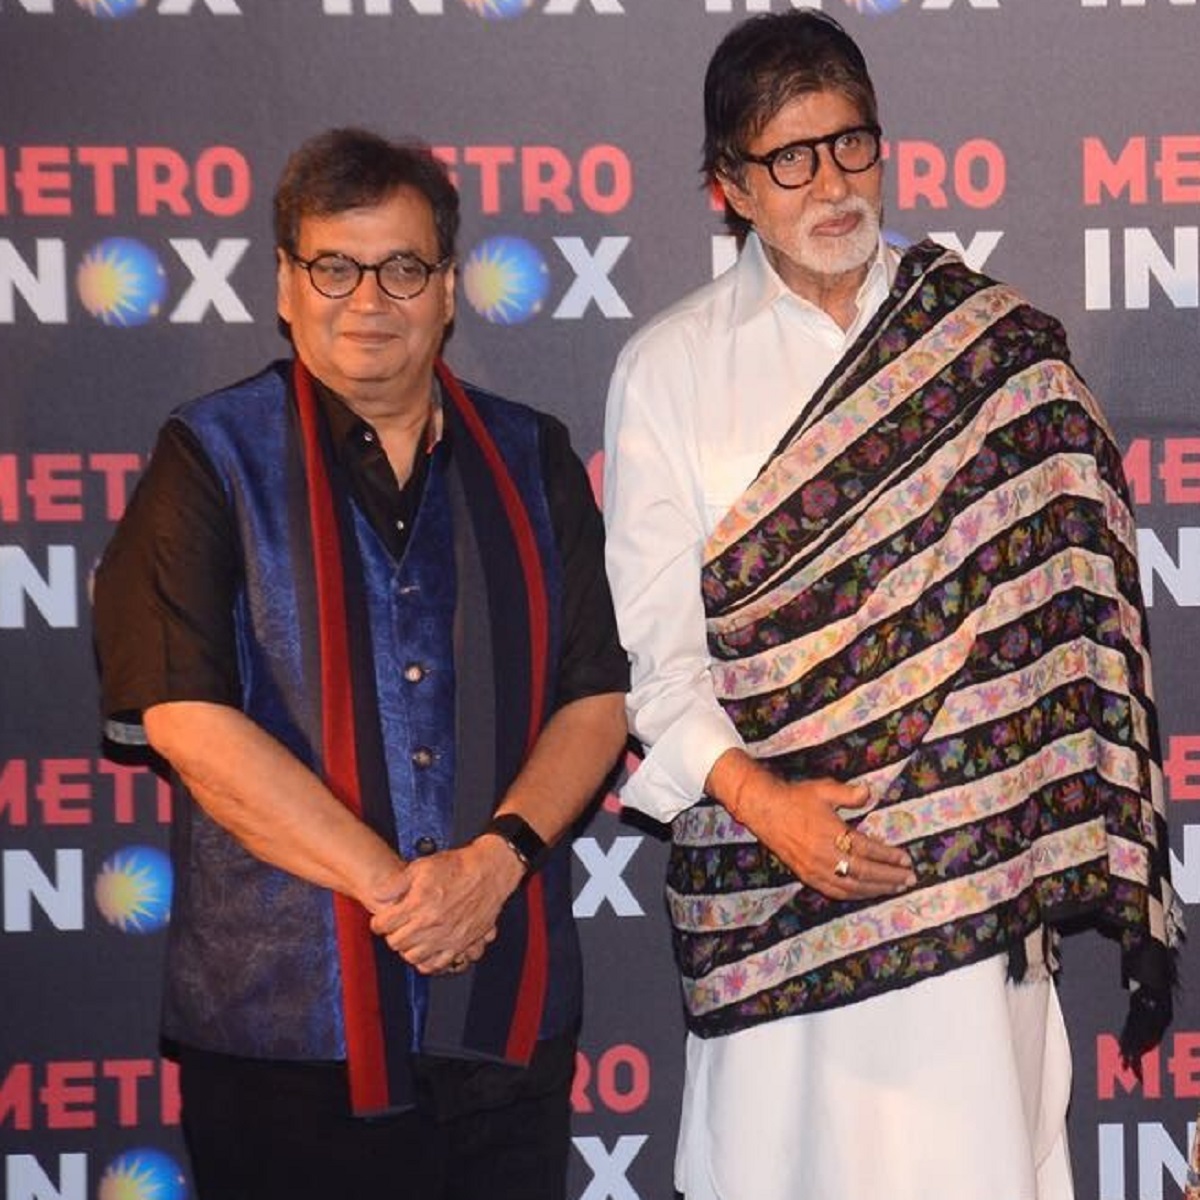 The Past Blast: Amitabh Bachchan and Lilliput, the epic tall vs short fight planned by Subhash Ghai in Devaa...